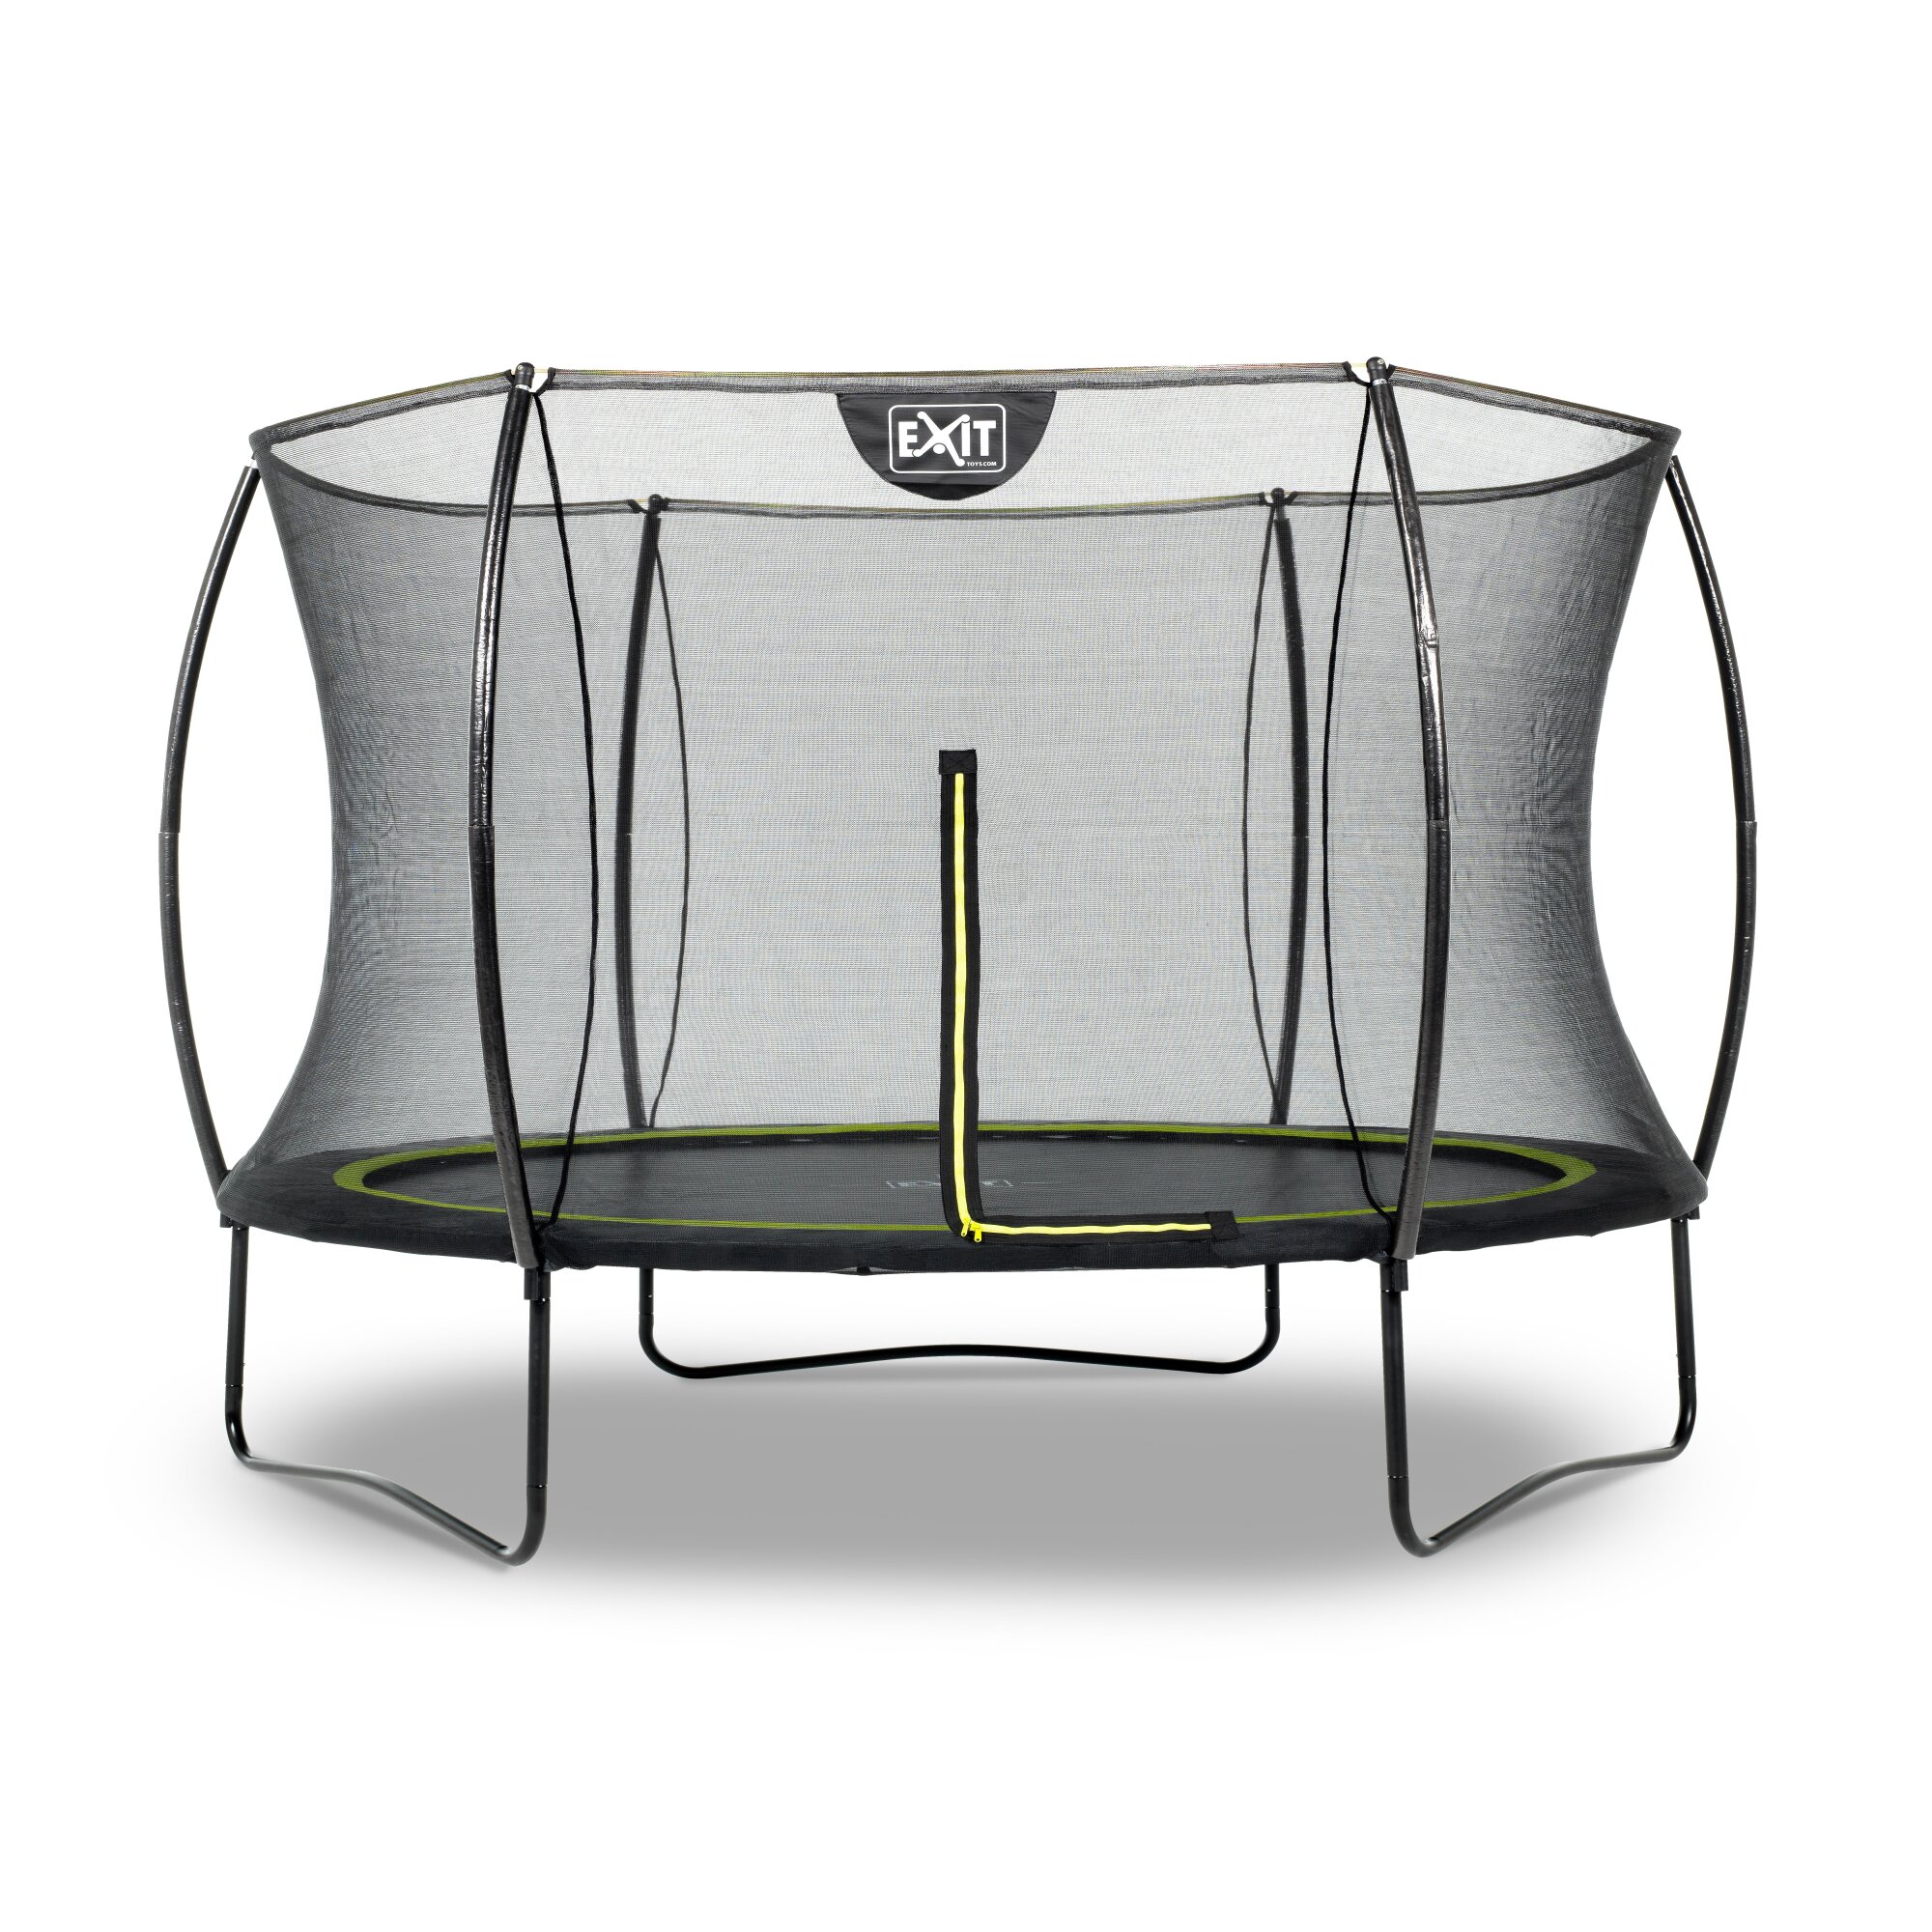 EXIT - Silhouette Trampoline ø 305 cm with Safety Net - Black (12.93.10.00)